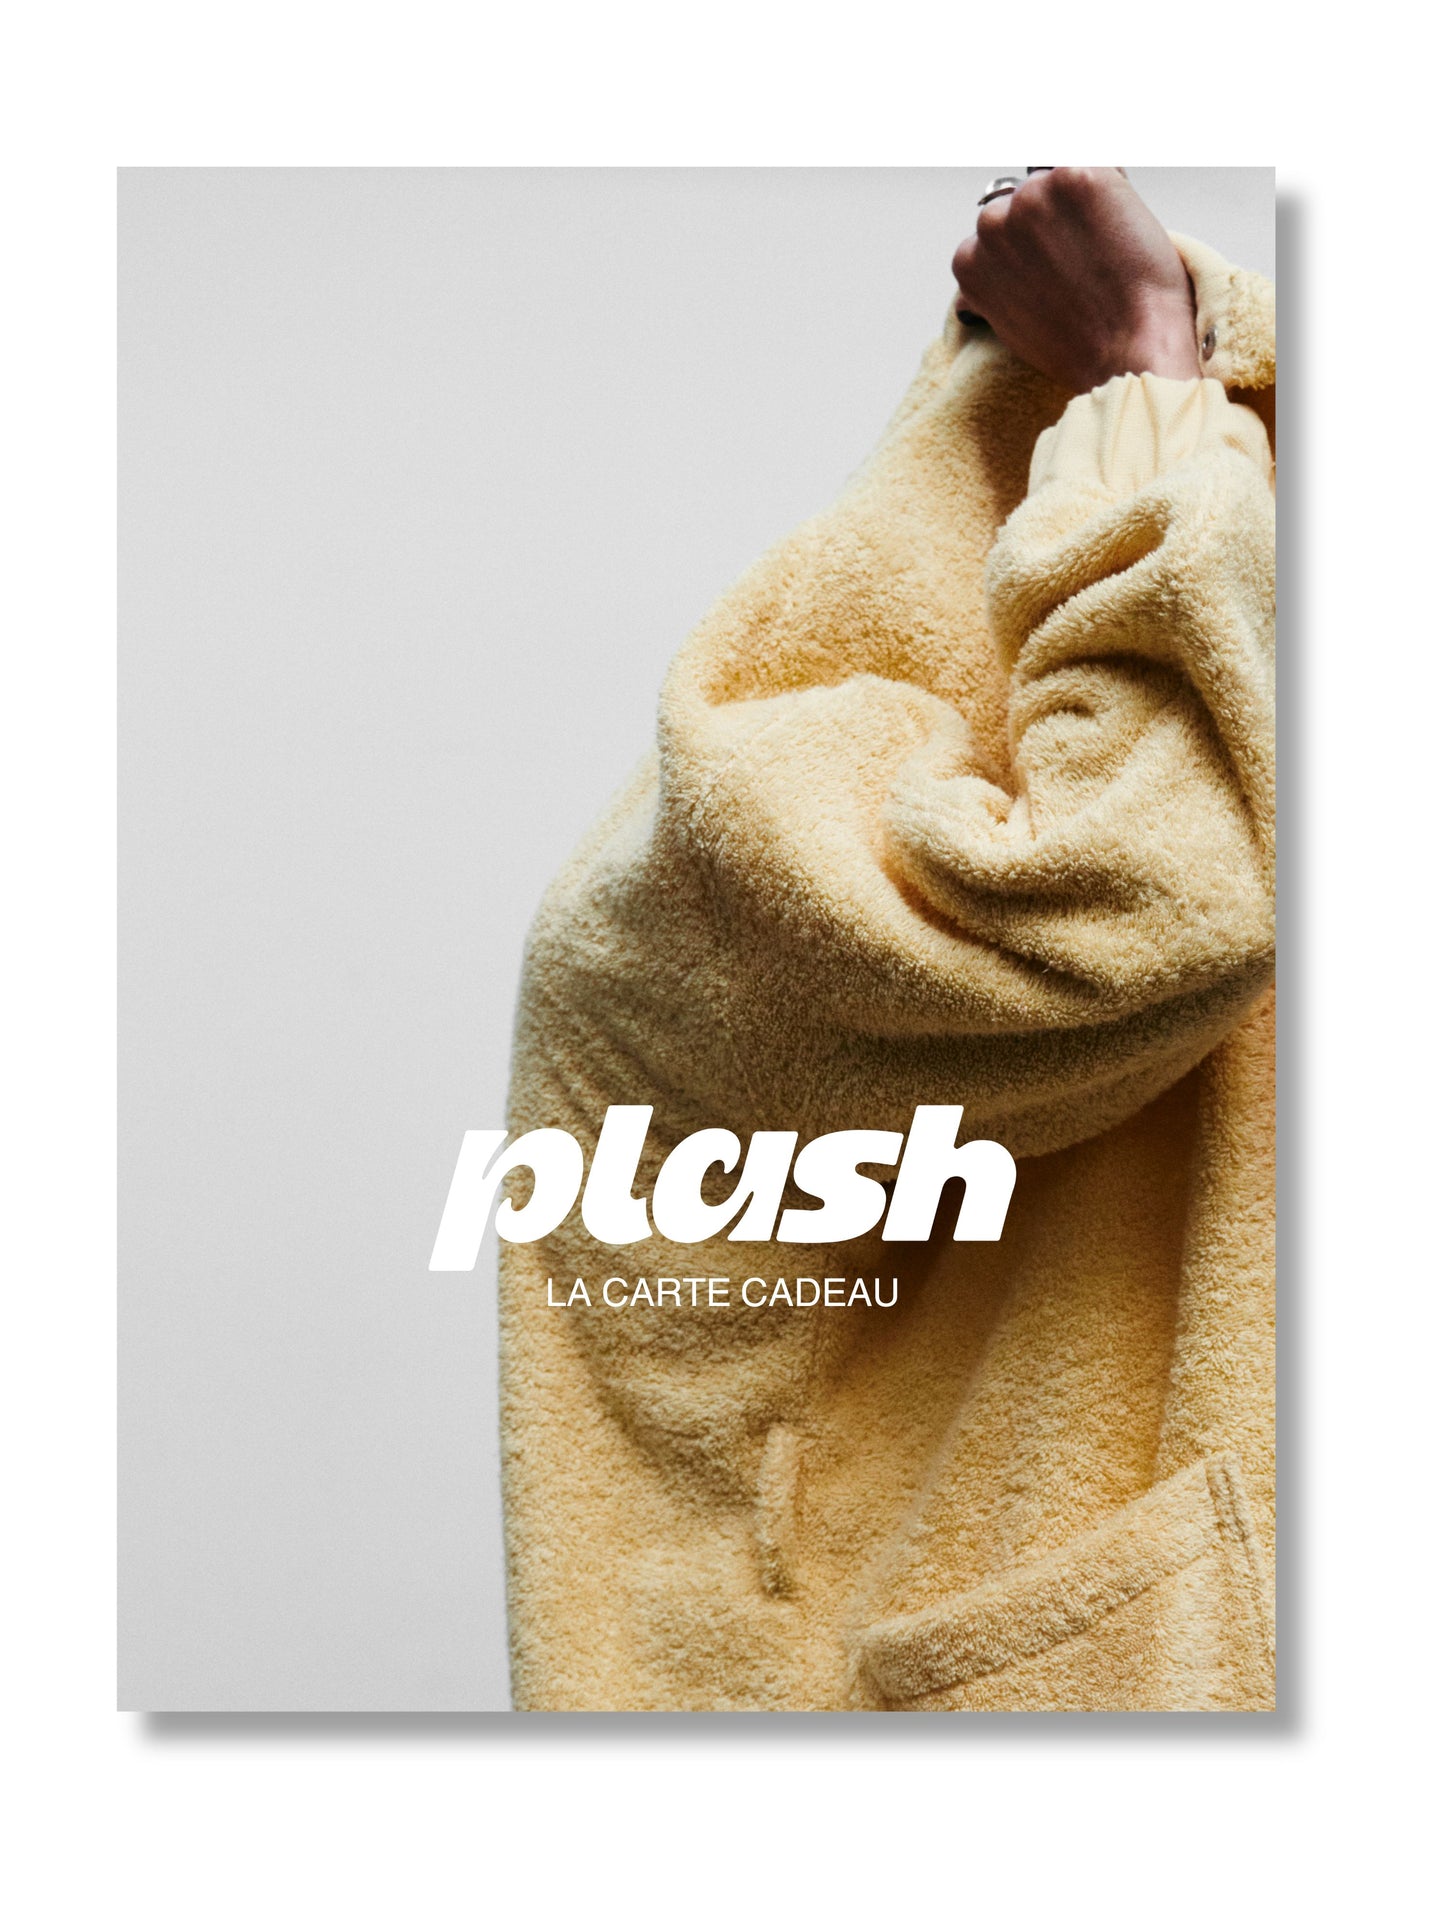 The Plash gift card